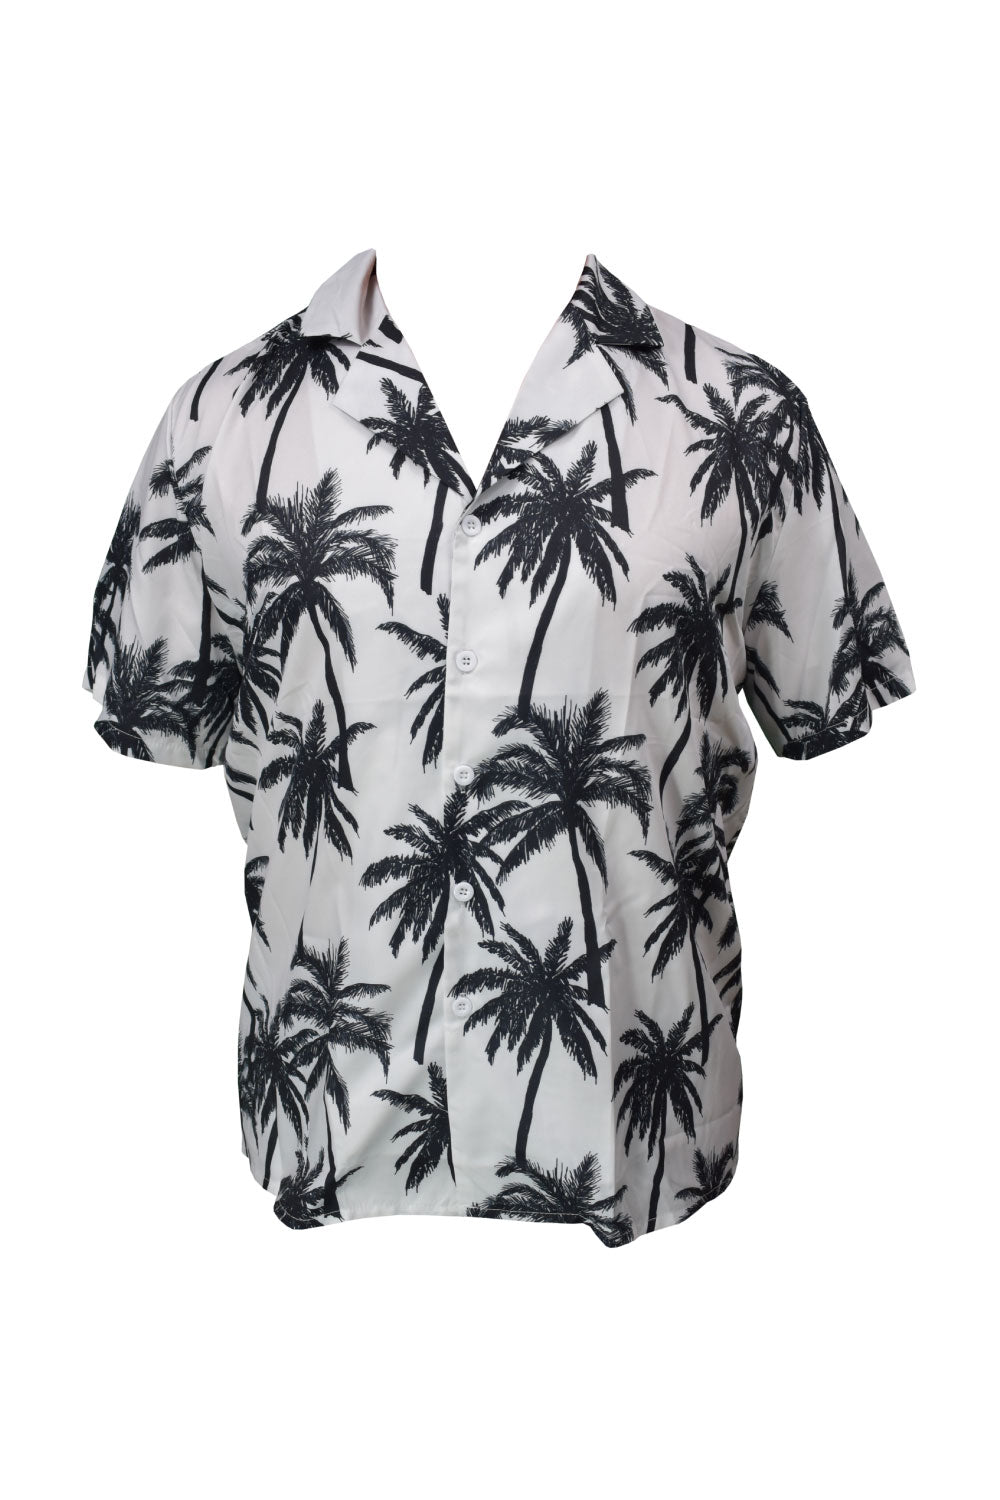 Image of the front of the Palm Tree Silhouette Hawaiian Men's Shirt.